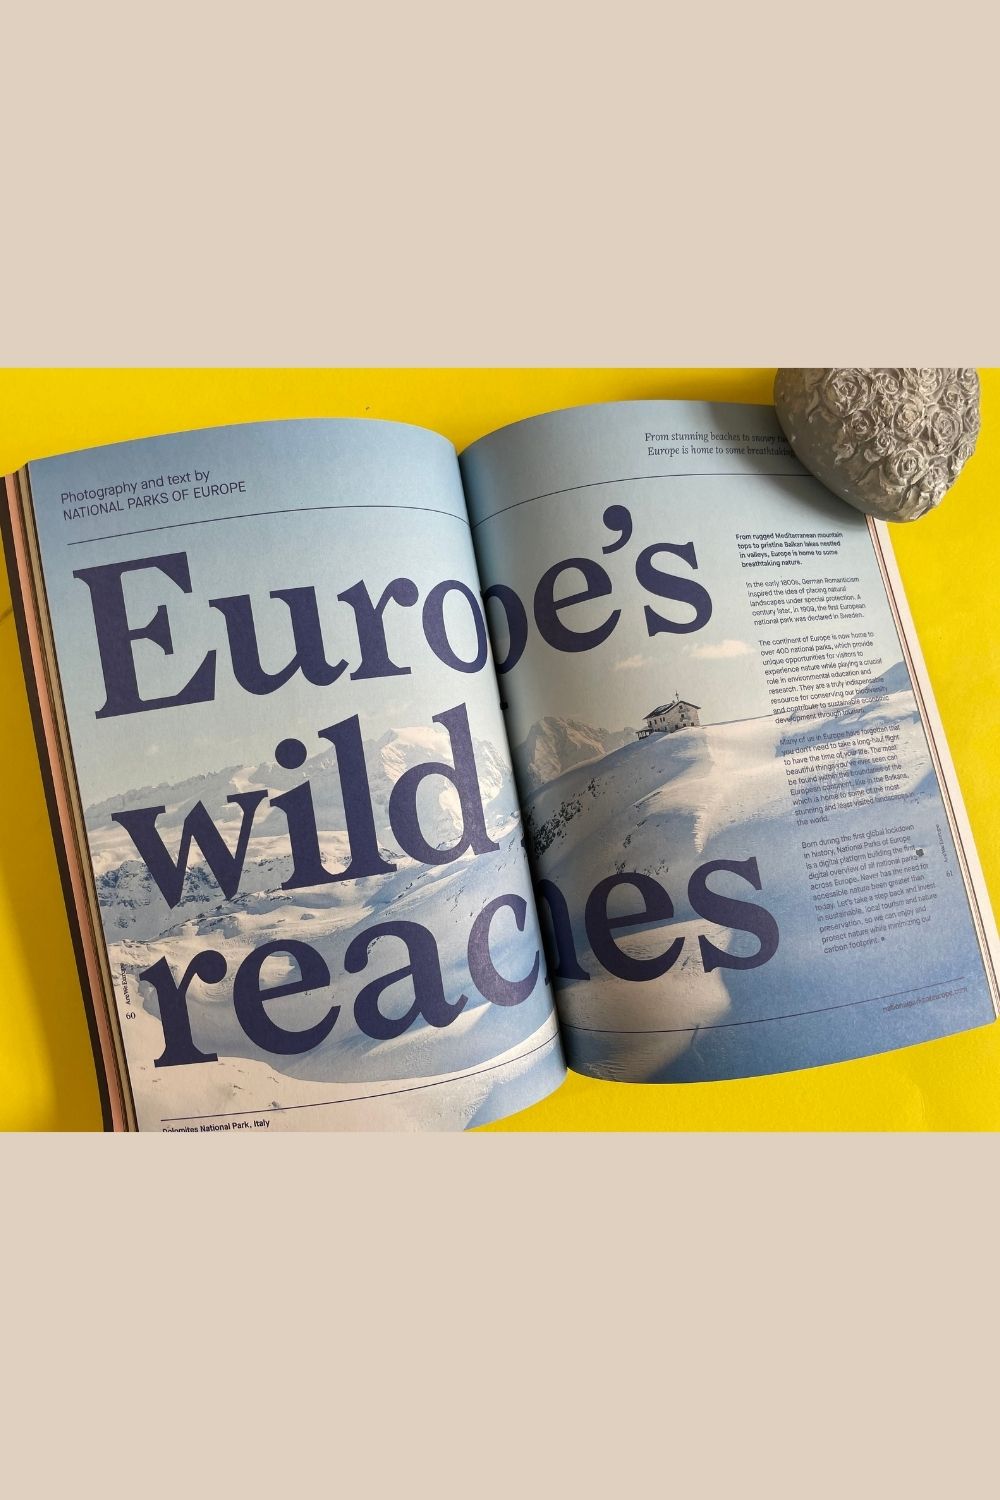 Inside issue 8 of Are We Europe